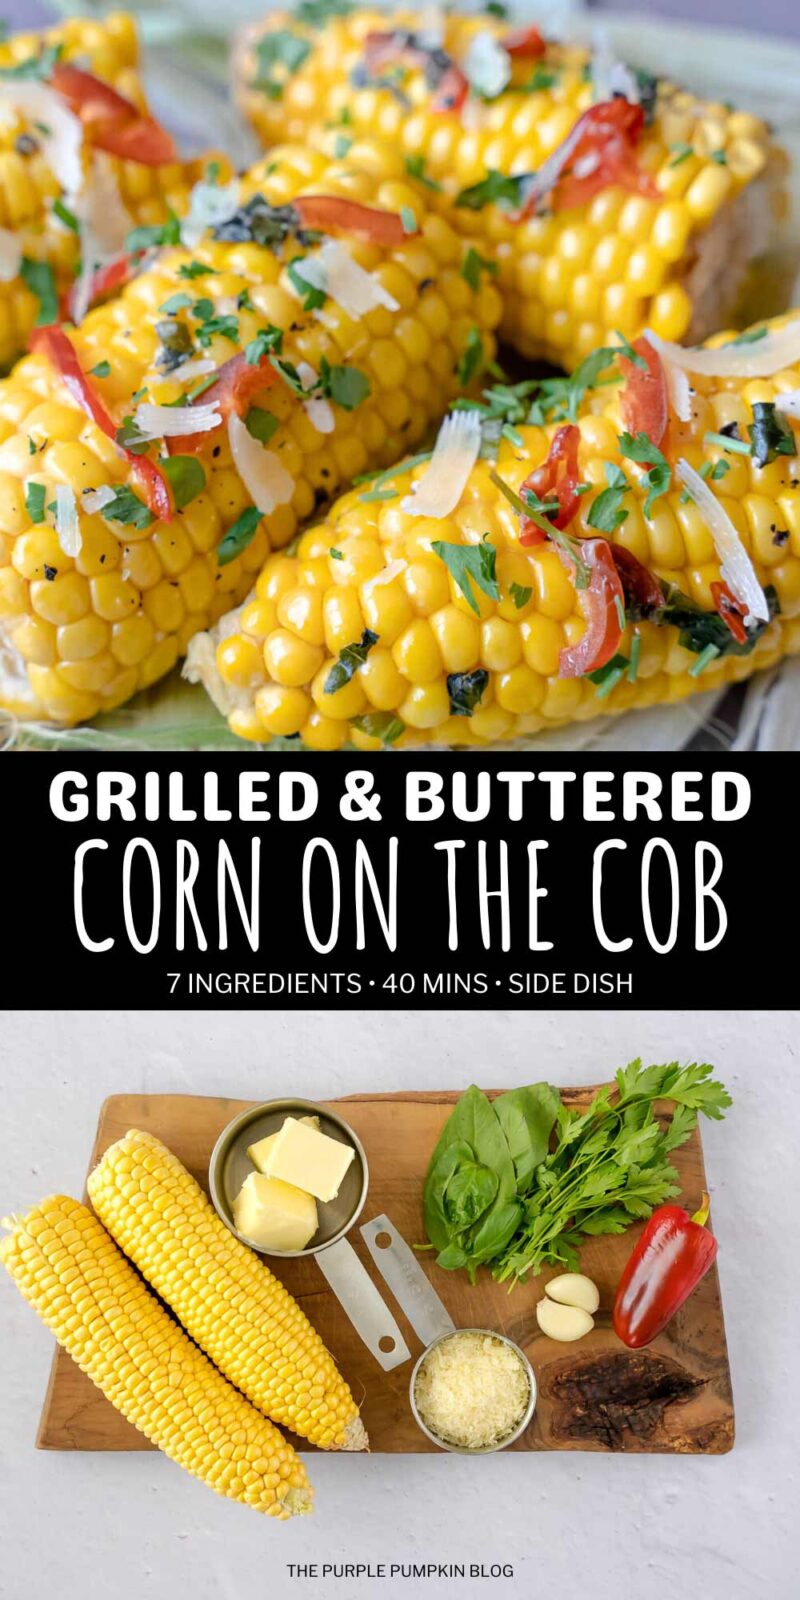 Grilled & Buttered Corn on the Cob